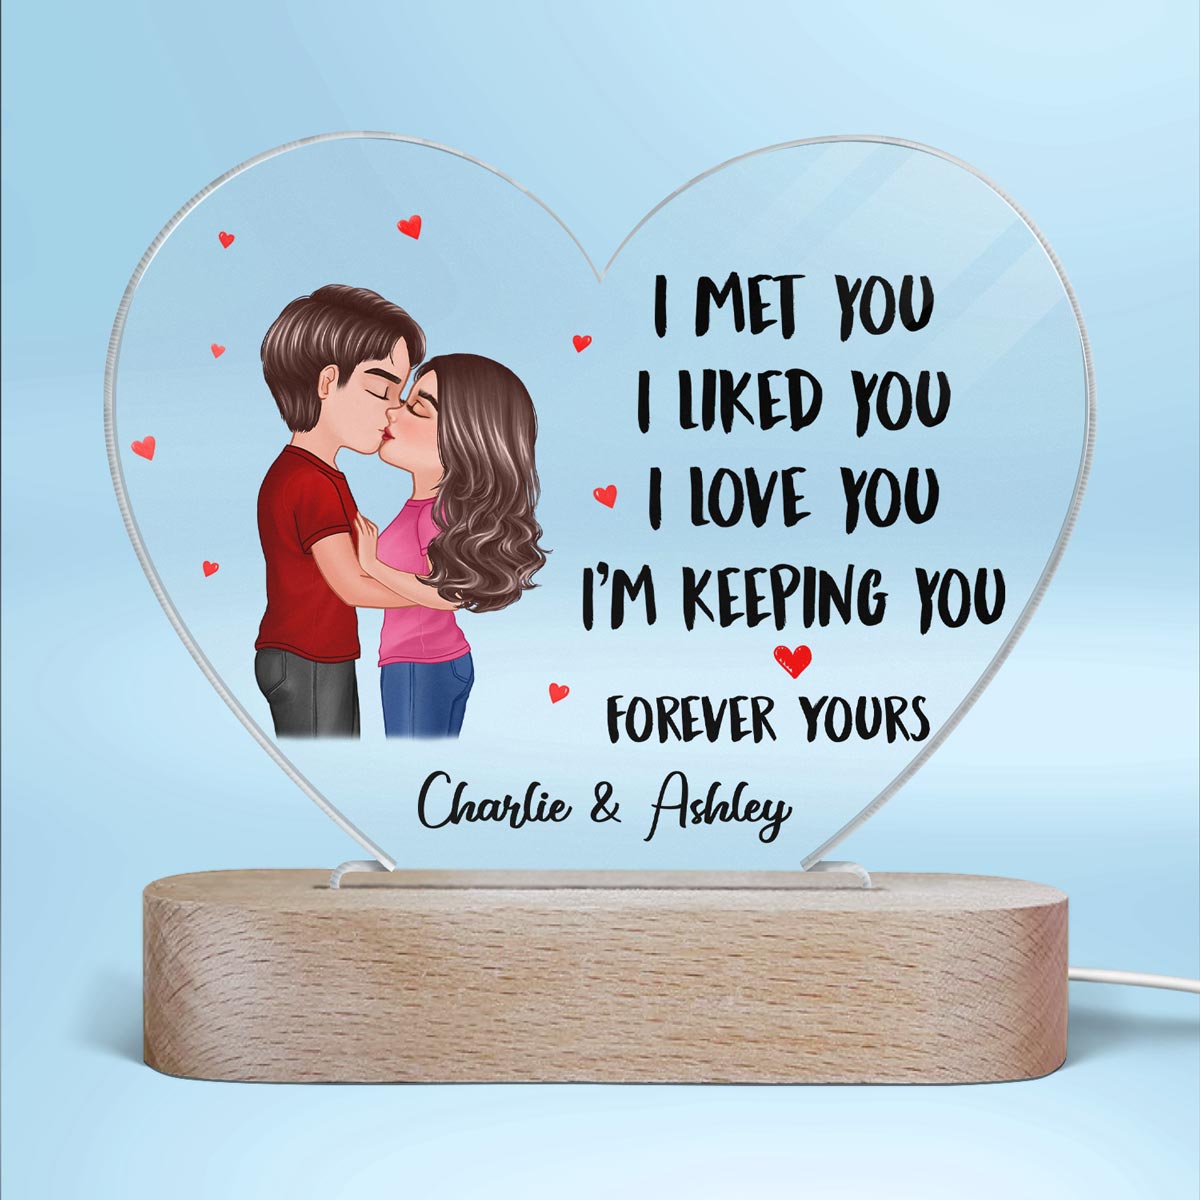 Doll Couple Kissing Gift For Him For Her Personalized Acrylic Heart Plaque LED Lamp Night Light